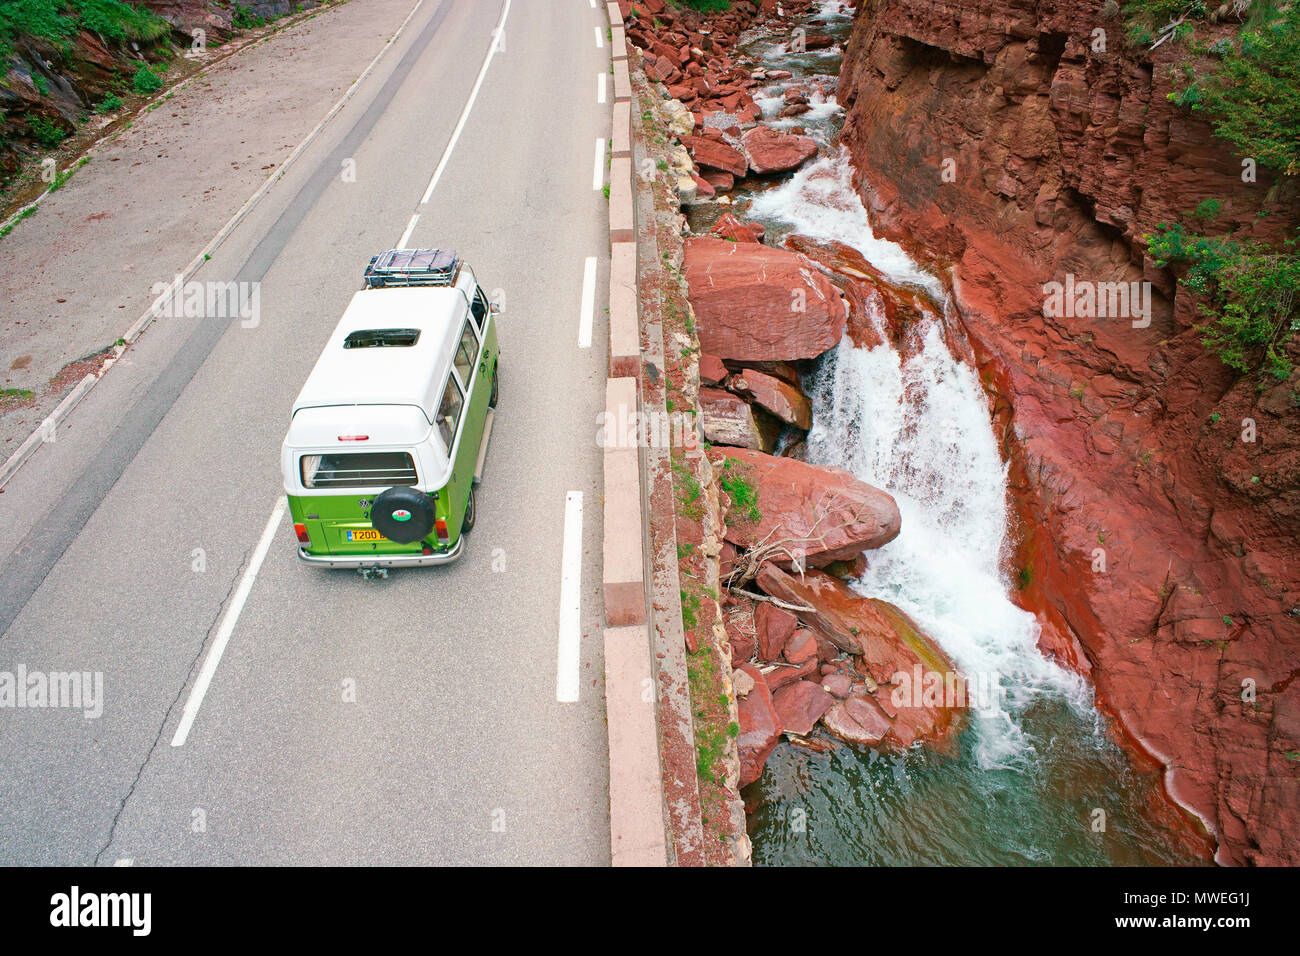 AERIAL VIEW from a 6-meter mast. Sightseeing in the spectacular Gorges du Cians in a Volkswagen camper van. French Riviera's hinterland, France. Stock Photo